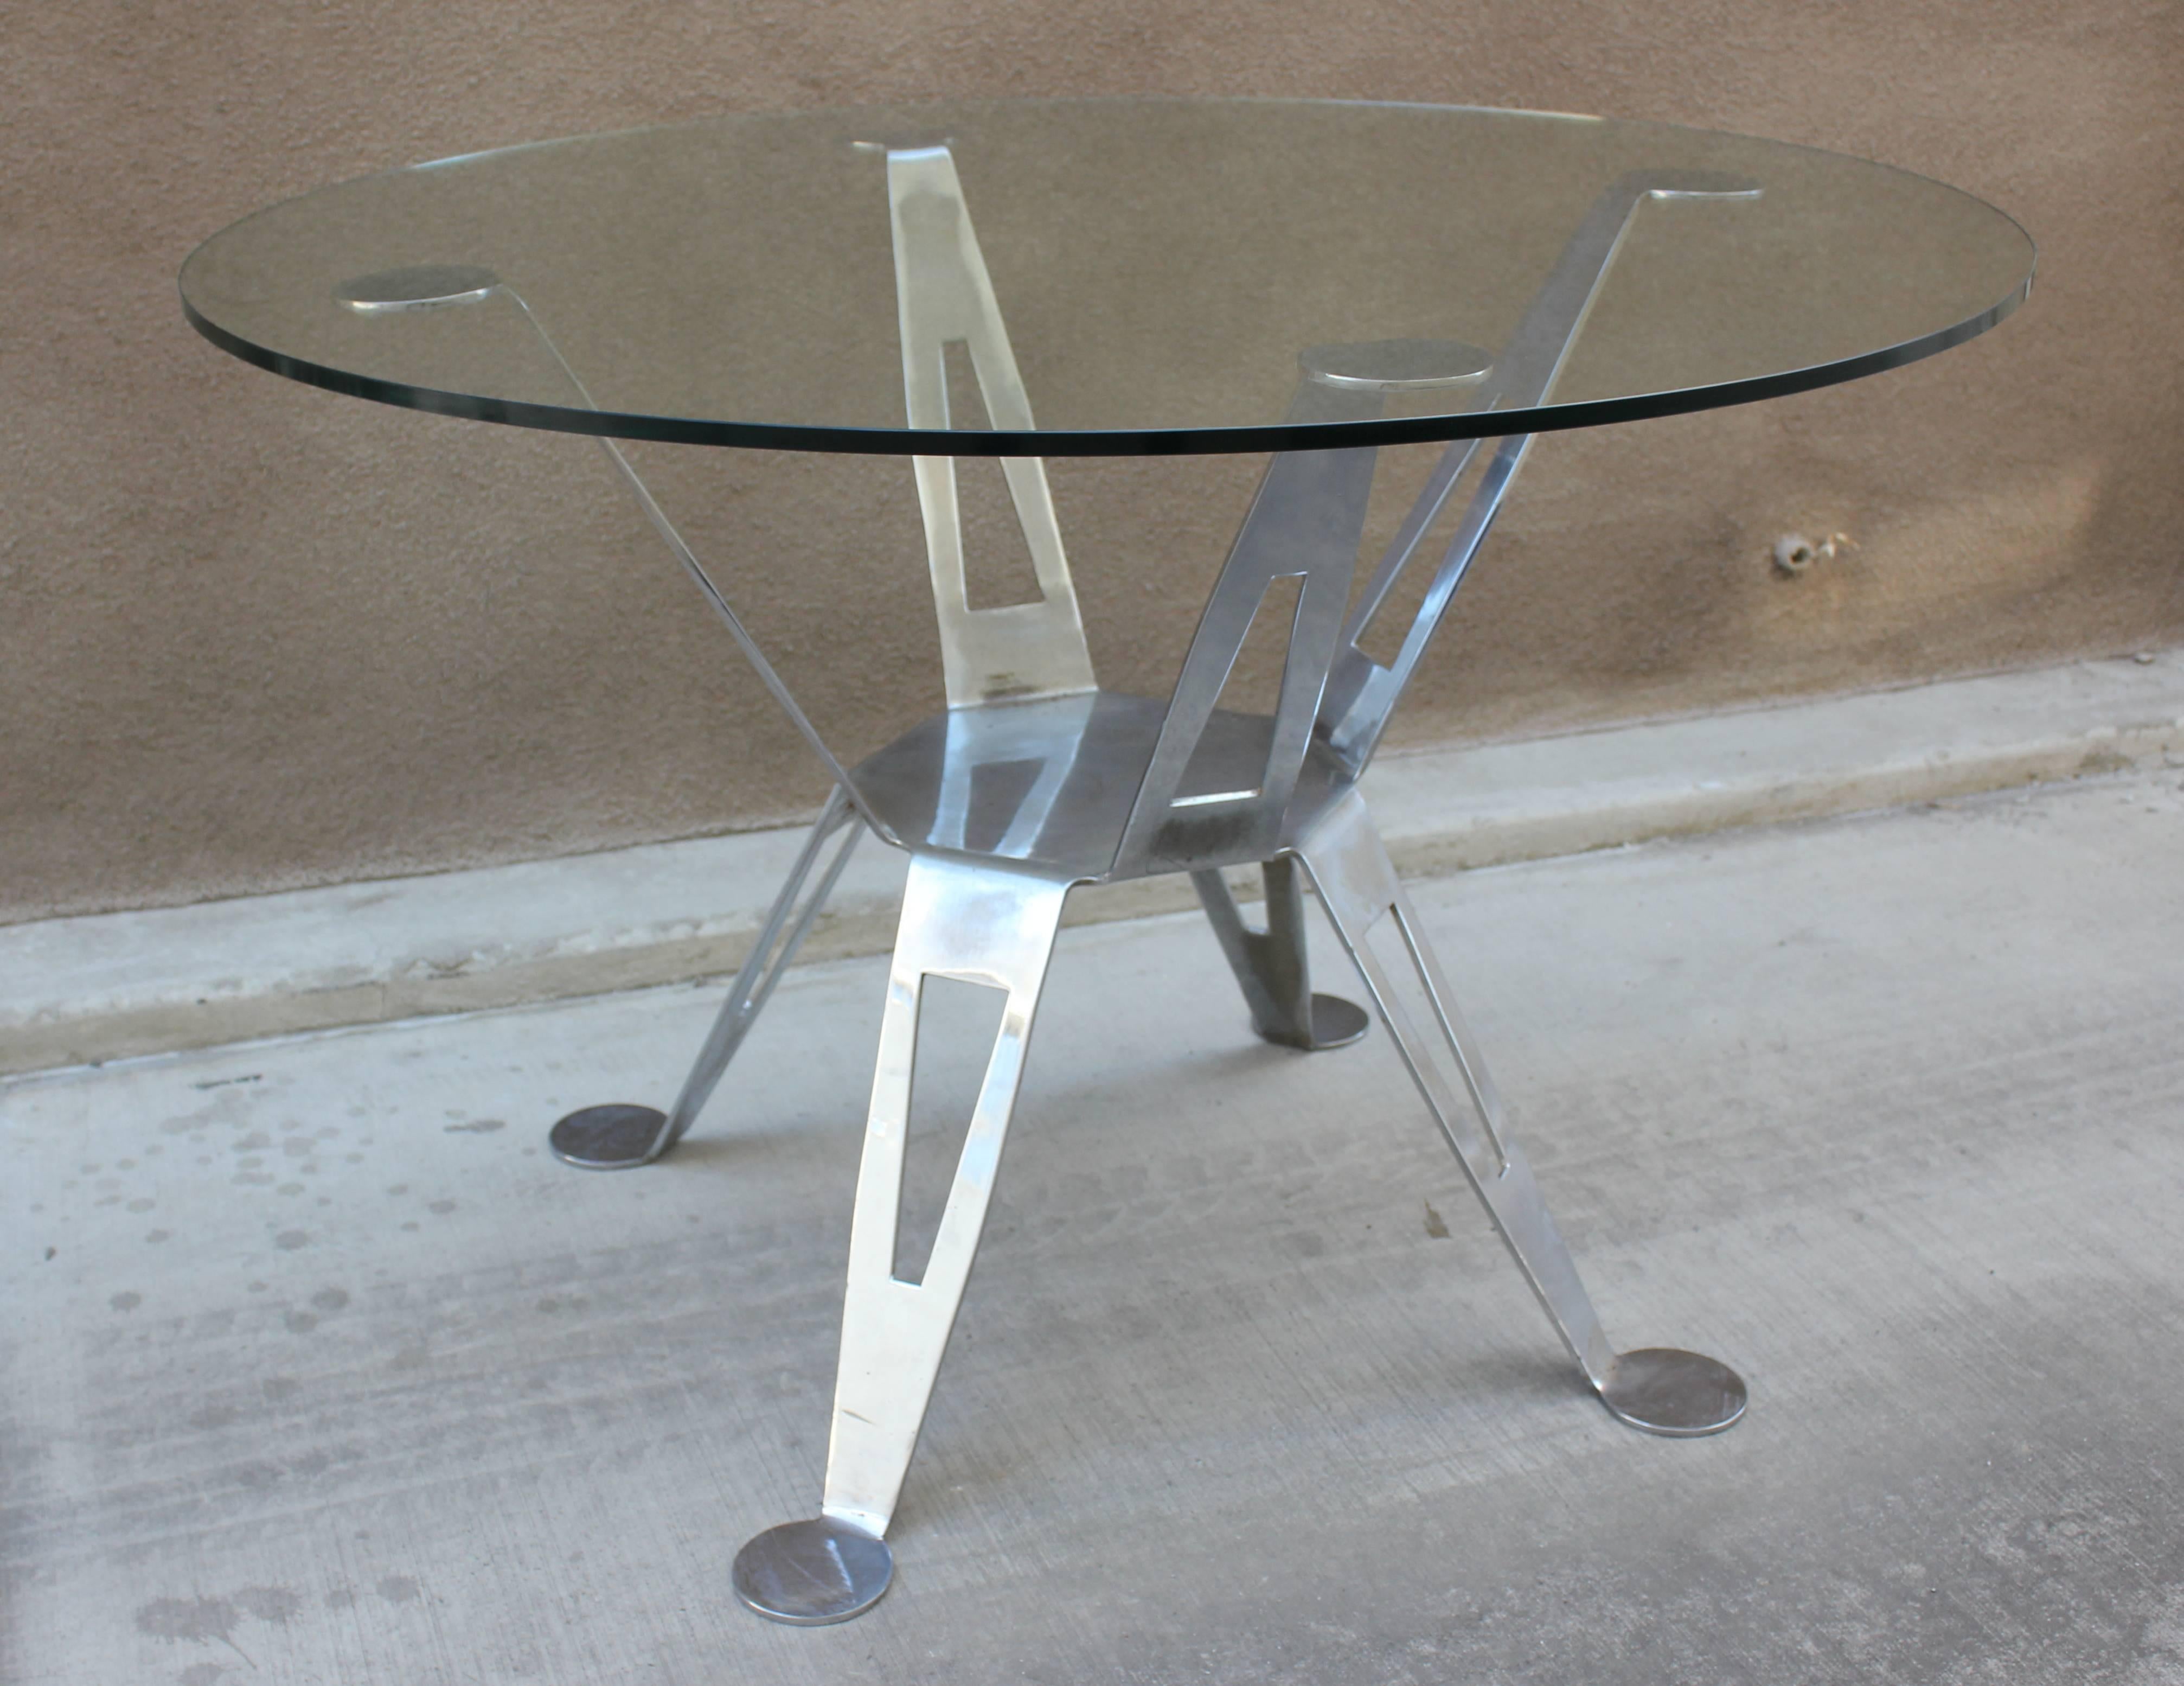 Extremely rare Pedro Ramirez Vazquez chromed steel dining table. Vazquez was a well known architect who worked in Mexico City. His furniture was custom or in limited editions. This table is cut from one piece of steel. Original finish with some